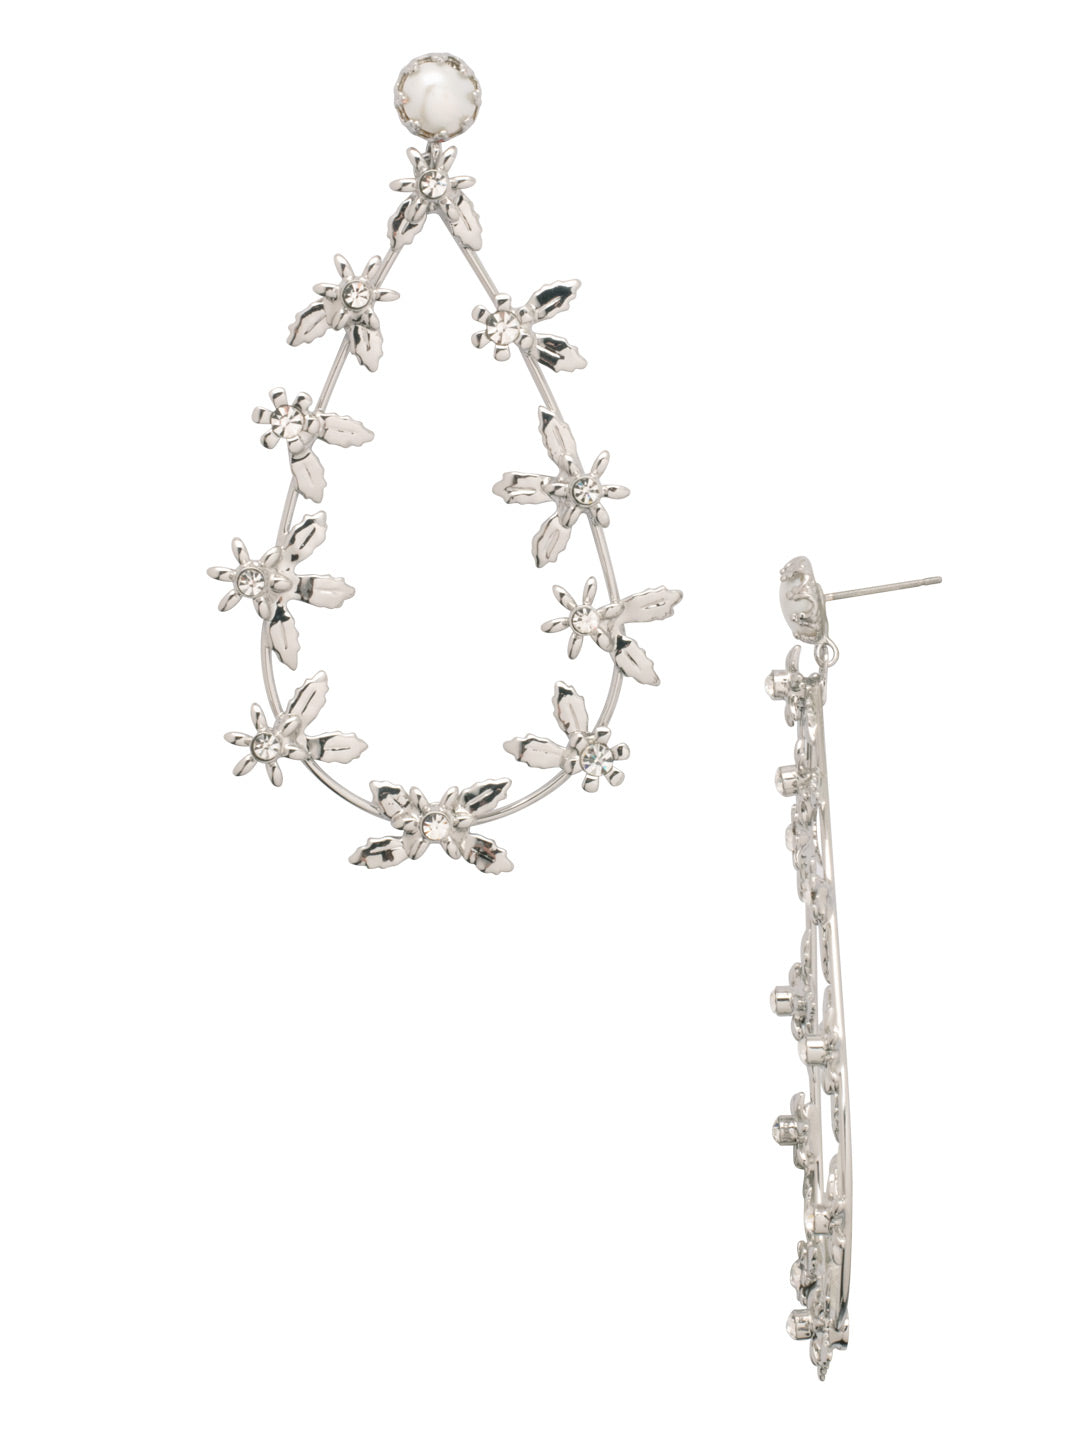 Aven Statement Earrings - EFH6PDMDP - <p>The Aven Statement Earrings feature a delicate oblong pear shaped hoop, embellished with branches and crystal studded flowers, dangling from a freshwater pearl stud. From Sorrelli's Modern Pearl collection in our Palladium finish.</p>